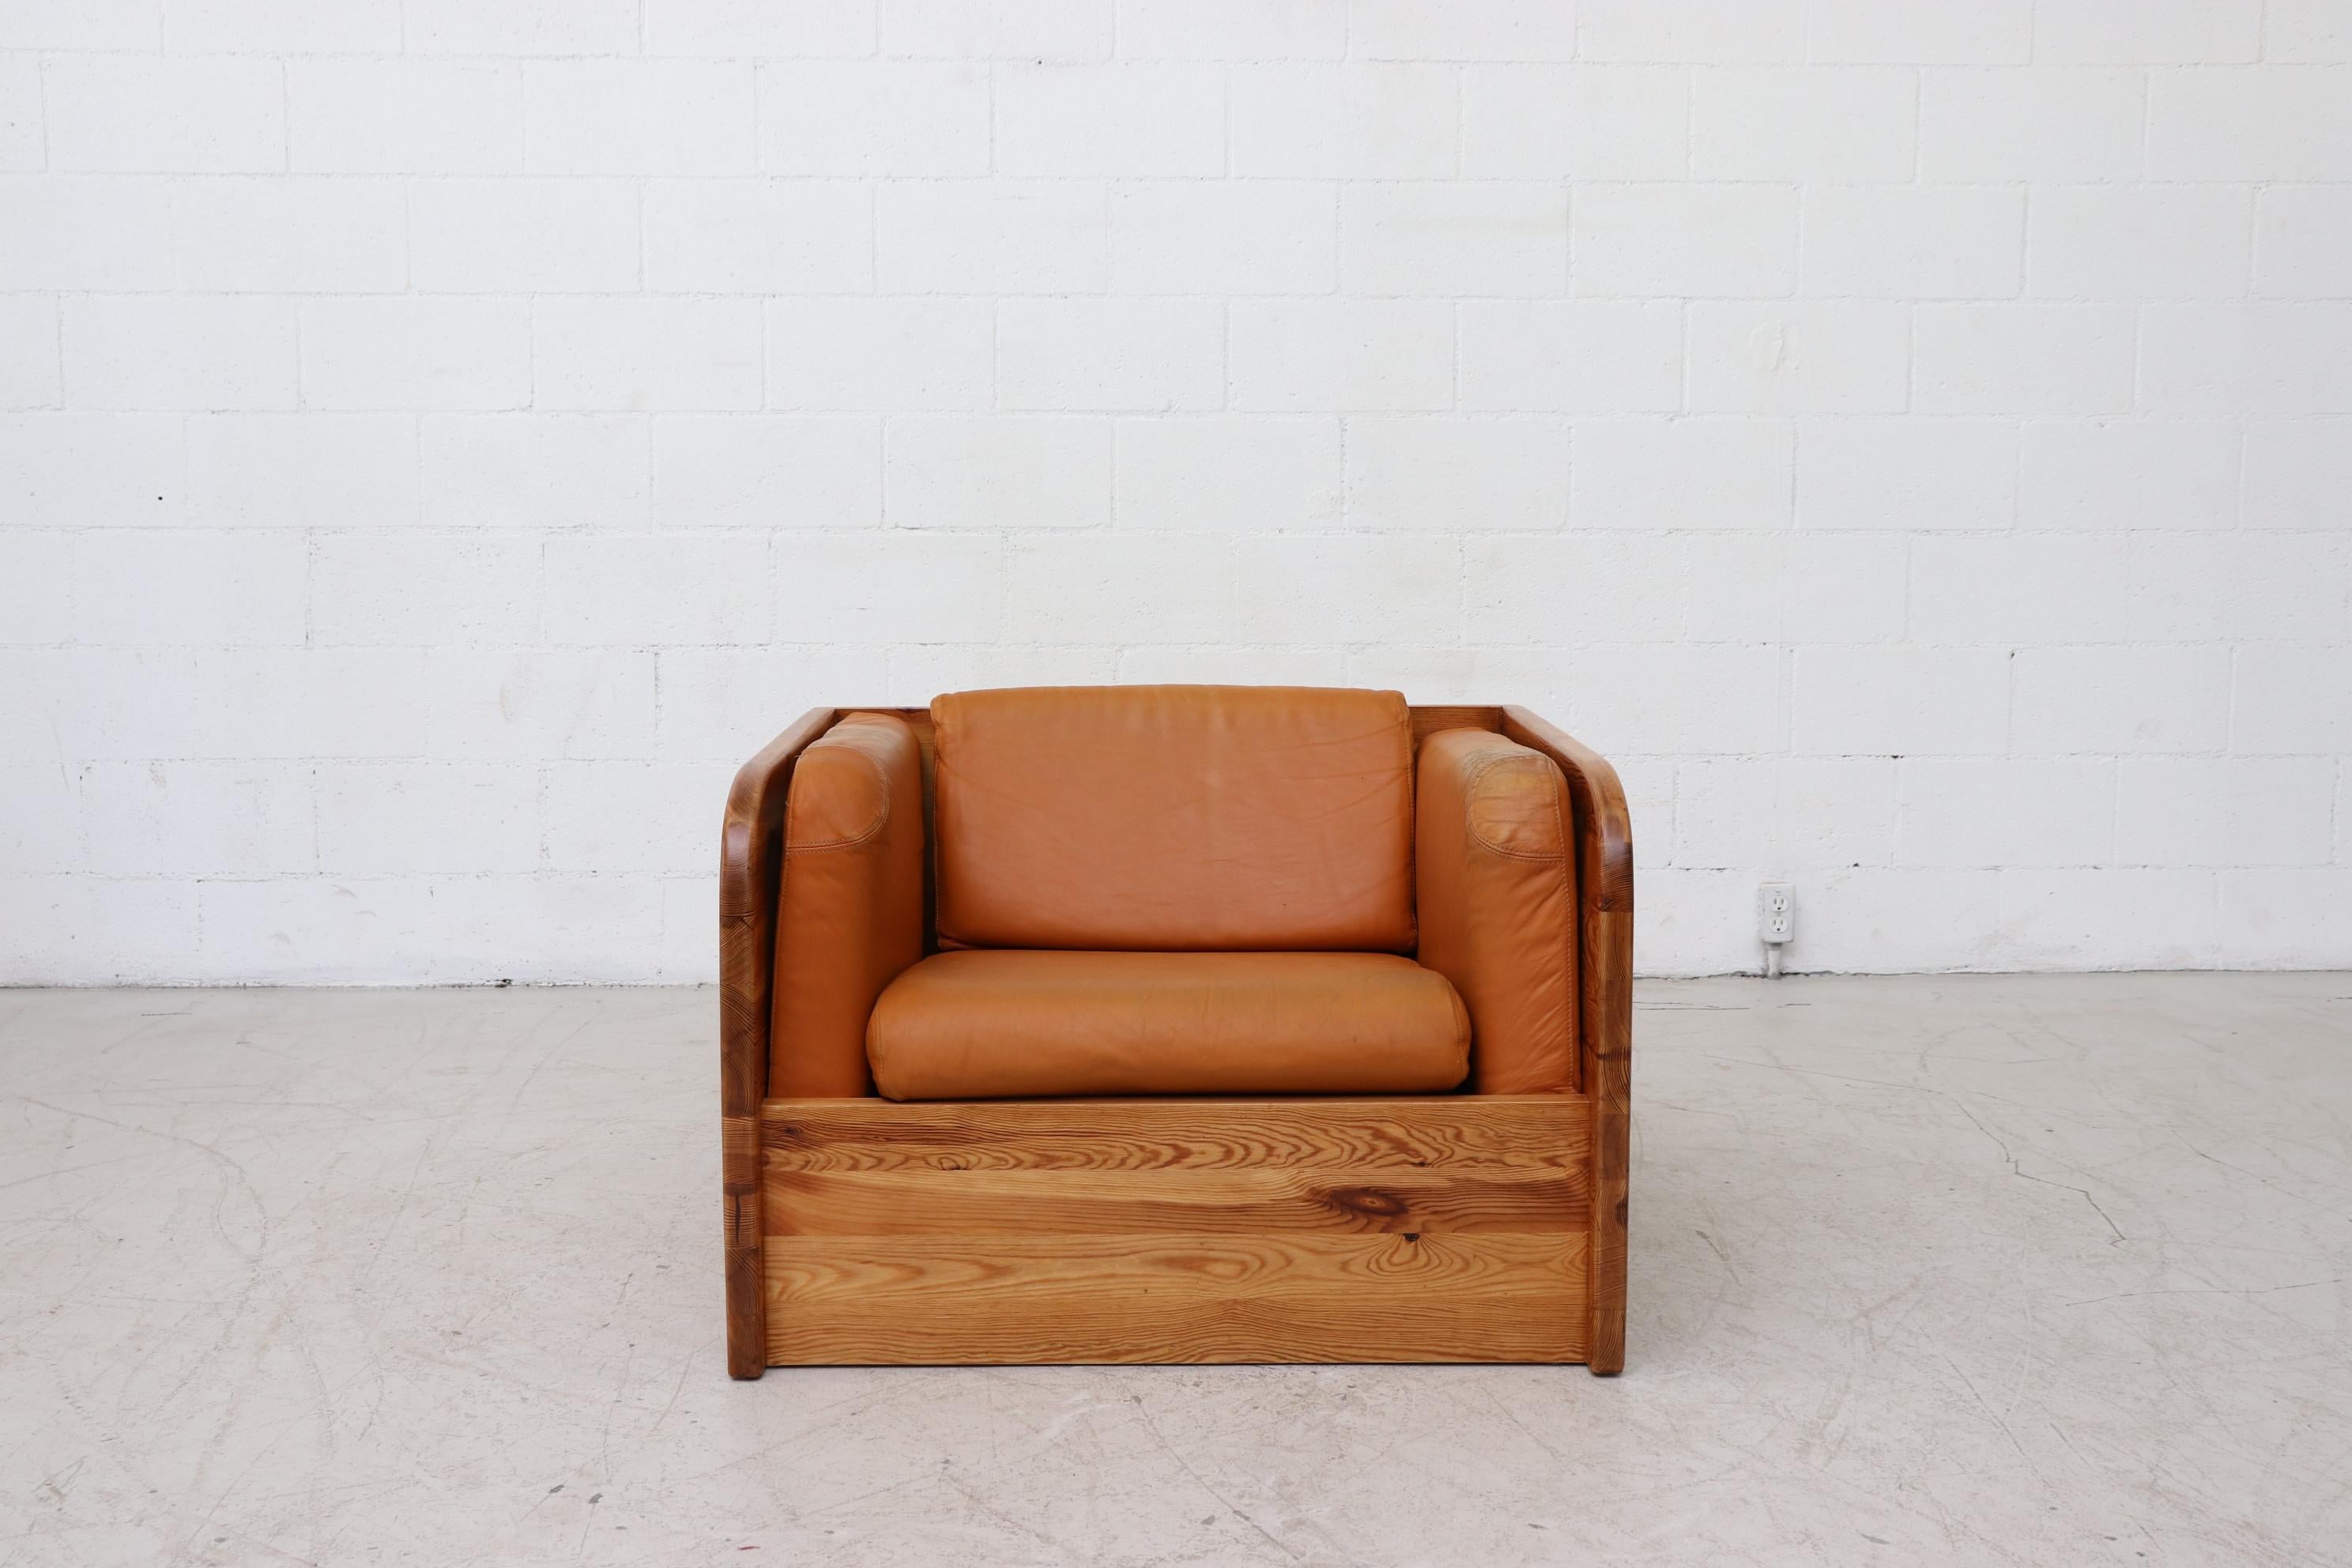 Handsome solid pine crate framed lounge chair with burnt orange leather. A midcentury design with a plesant Rustic style. Leather and frame are in original condition with some imperfections but in overall good shape. Wear is consistent with age and